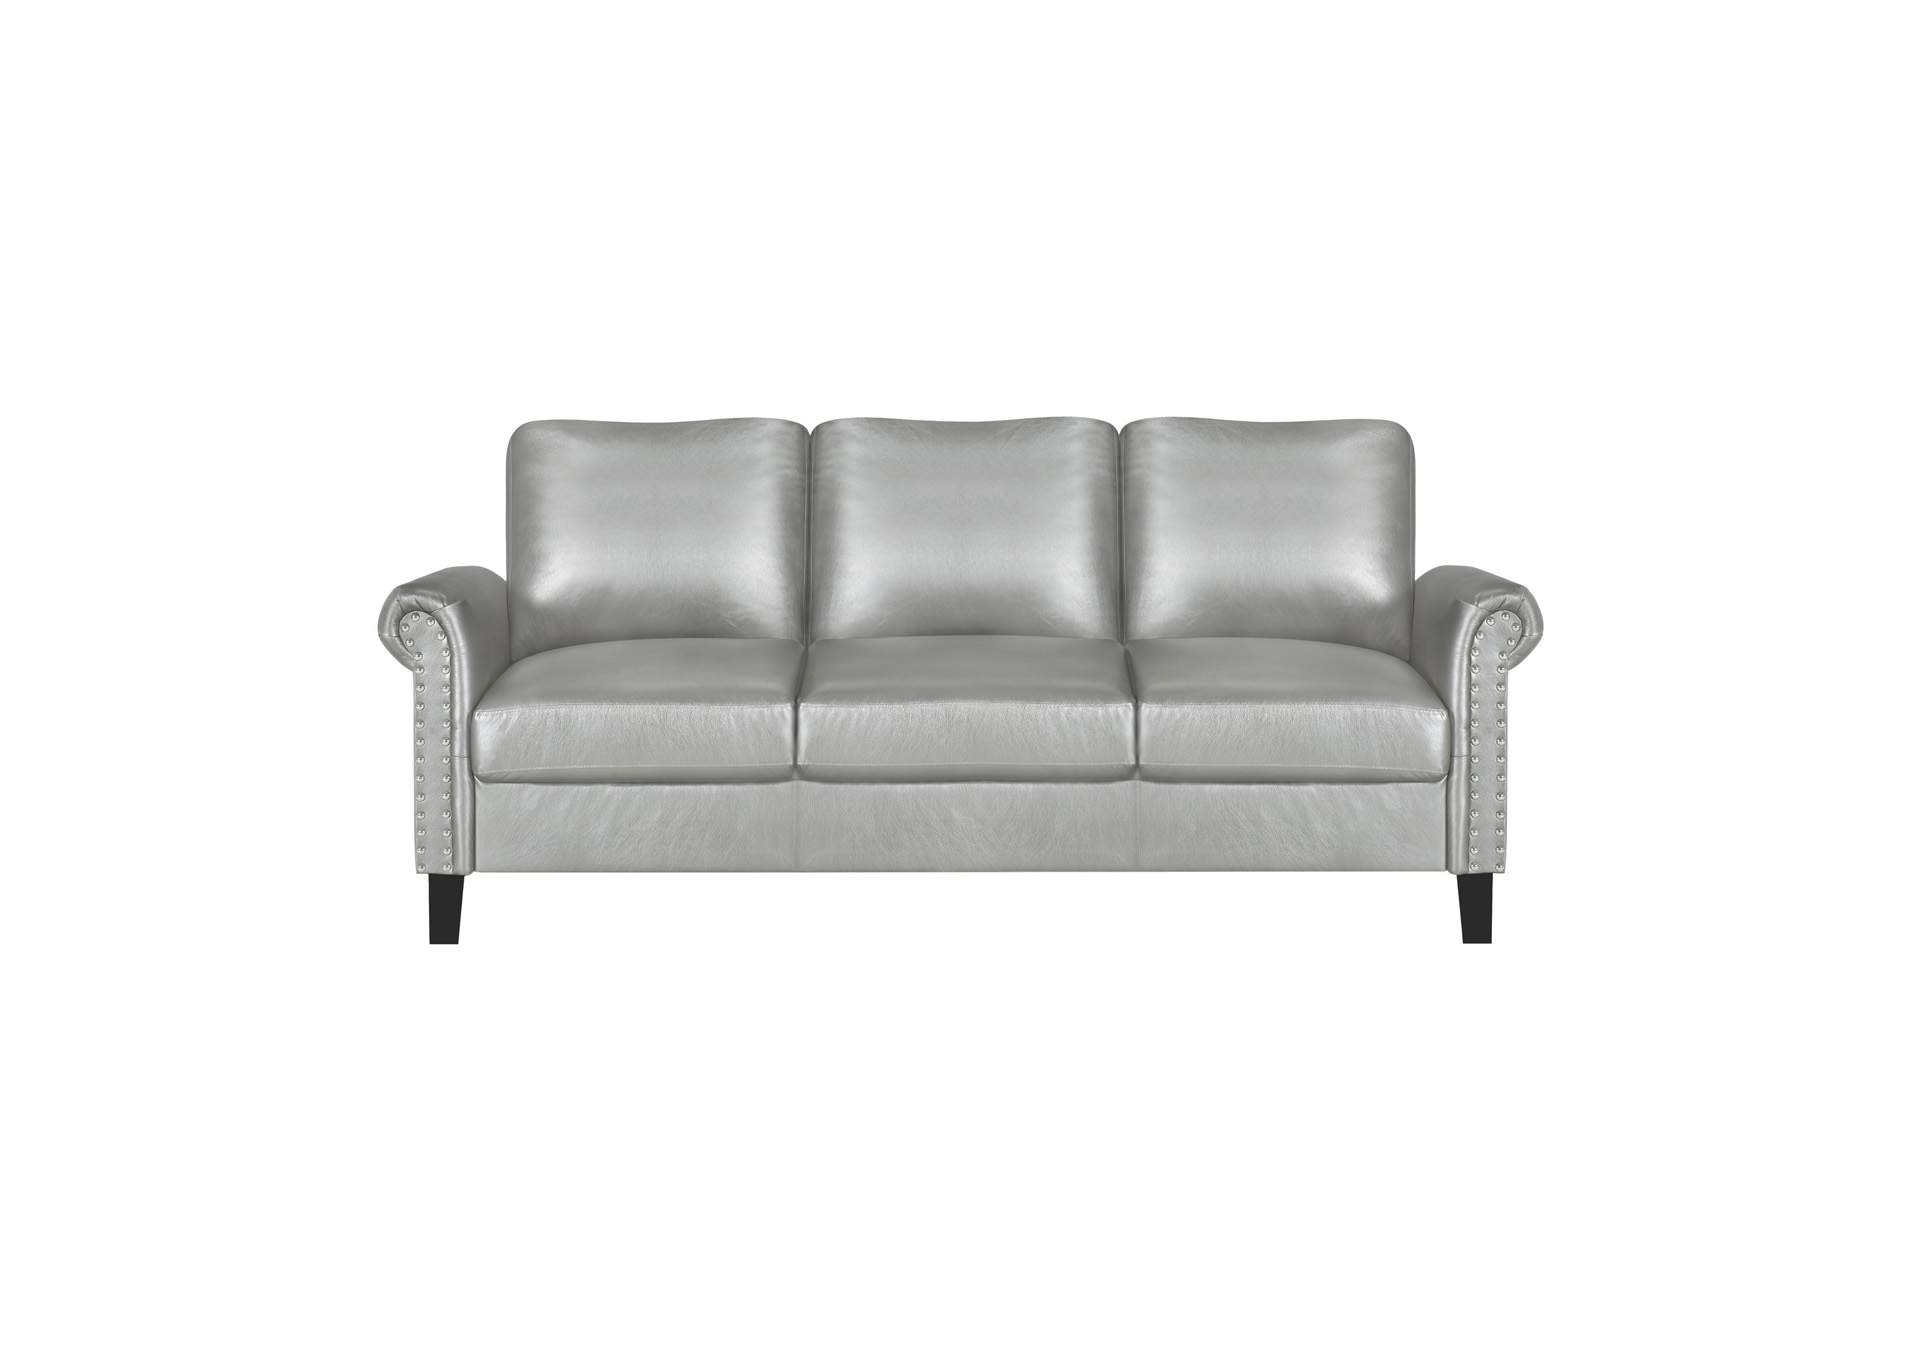 Silver Faux Leather Sofa Best, Pu Leather Couch